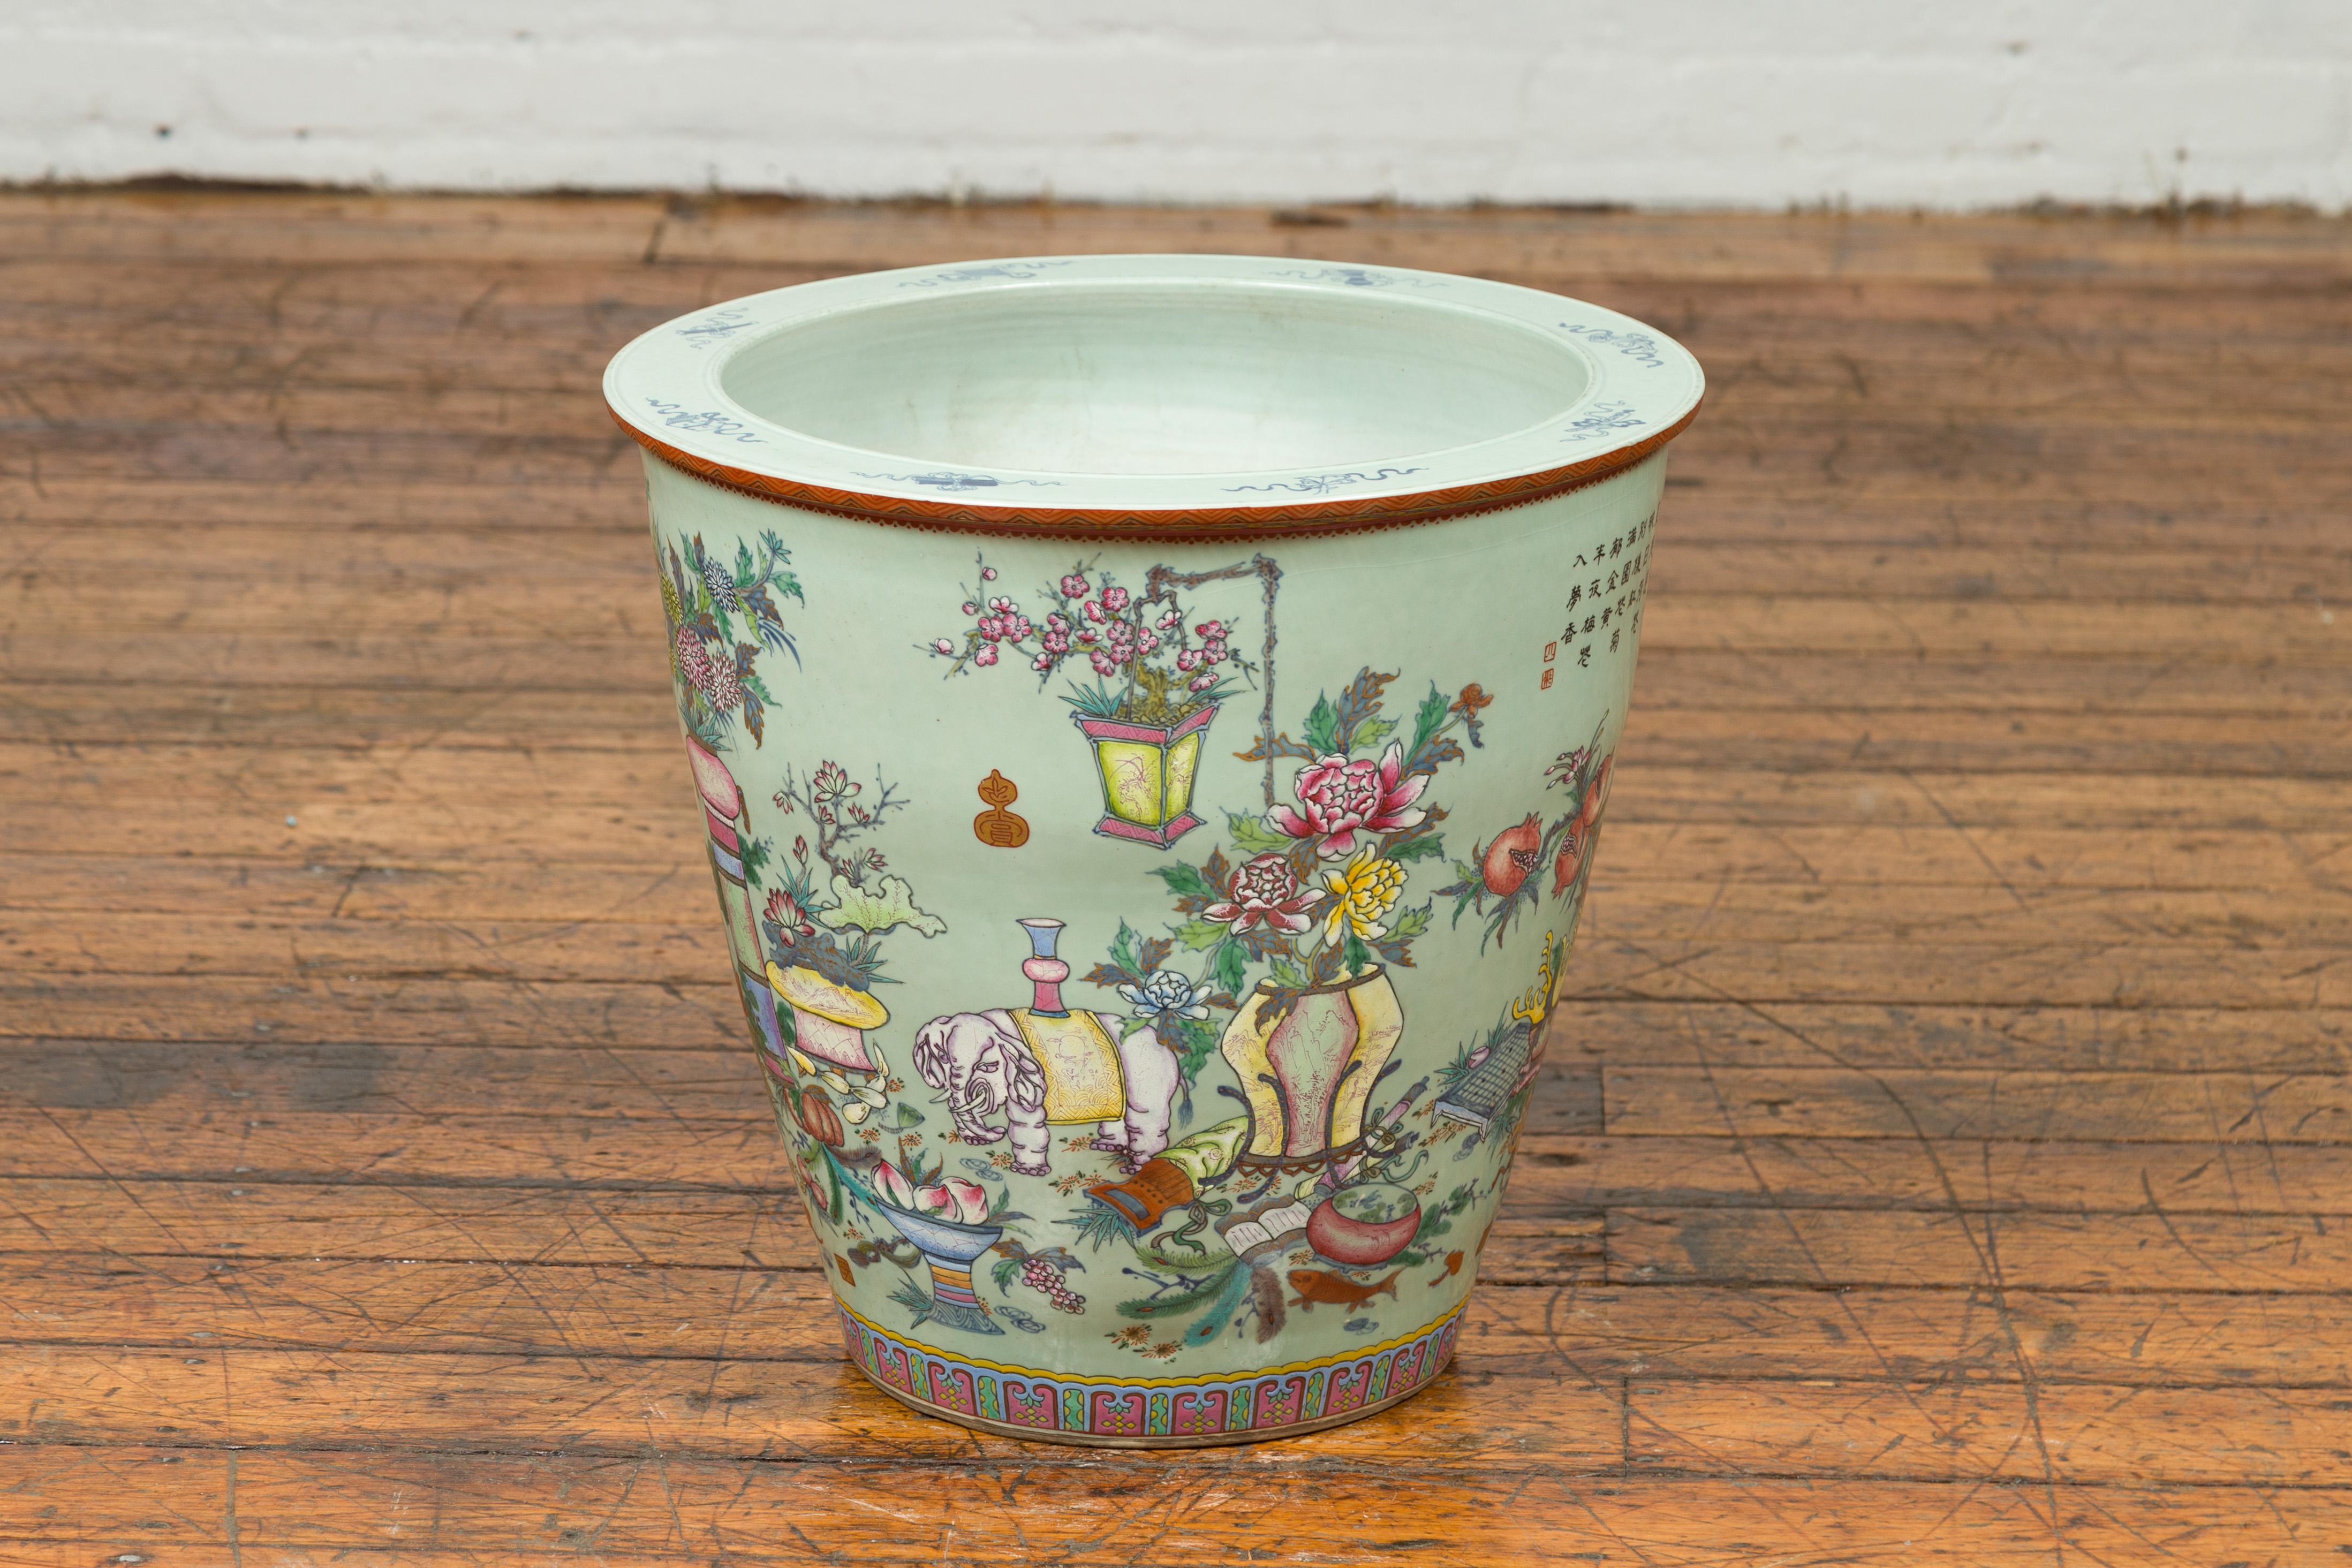 A Chinese vintage hand painted vase from the mid-20th century, with elephants, flowers, scholar's objects and fans. Created in China during the midcentury period, this large vase features a soft green ground adorned with a hand painted decor